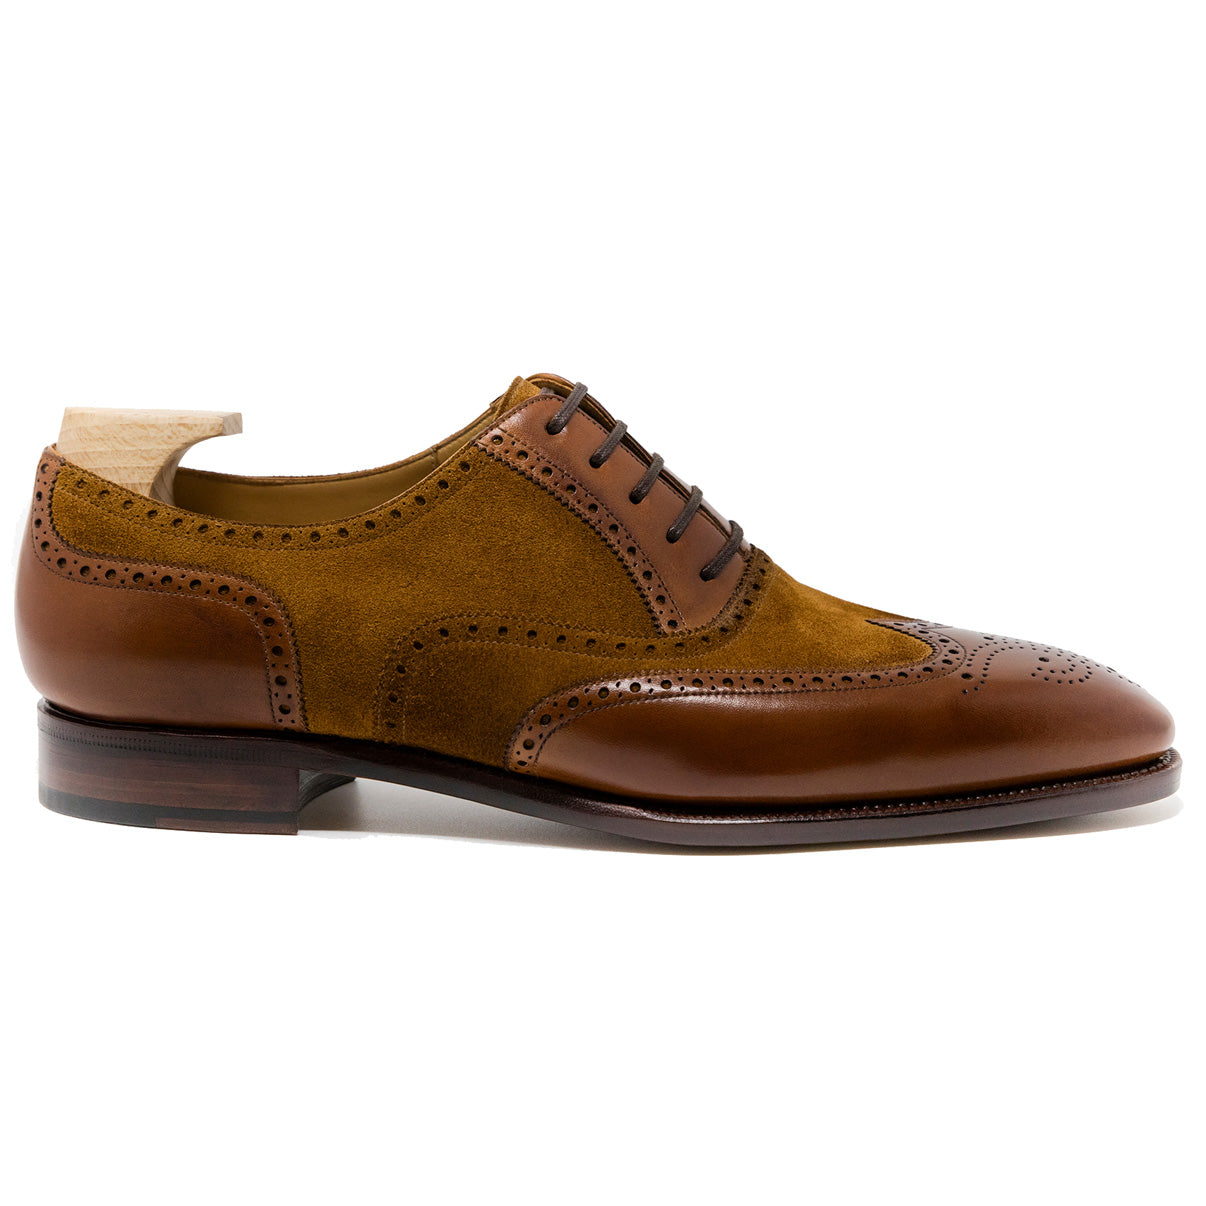 TLB Mallorca  Leather Men's Shoes made in Spain